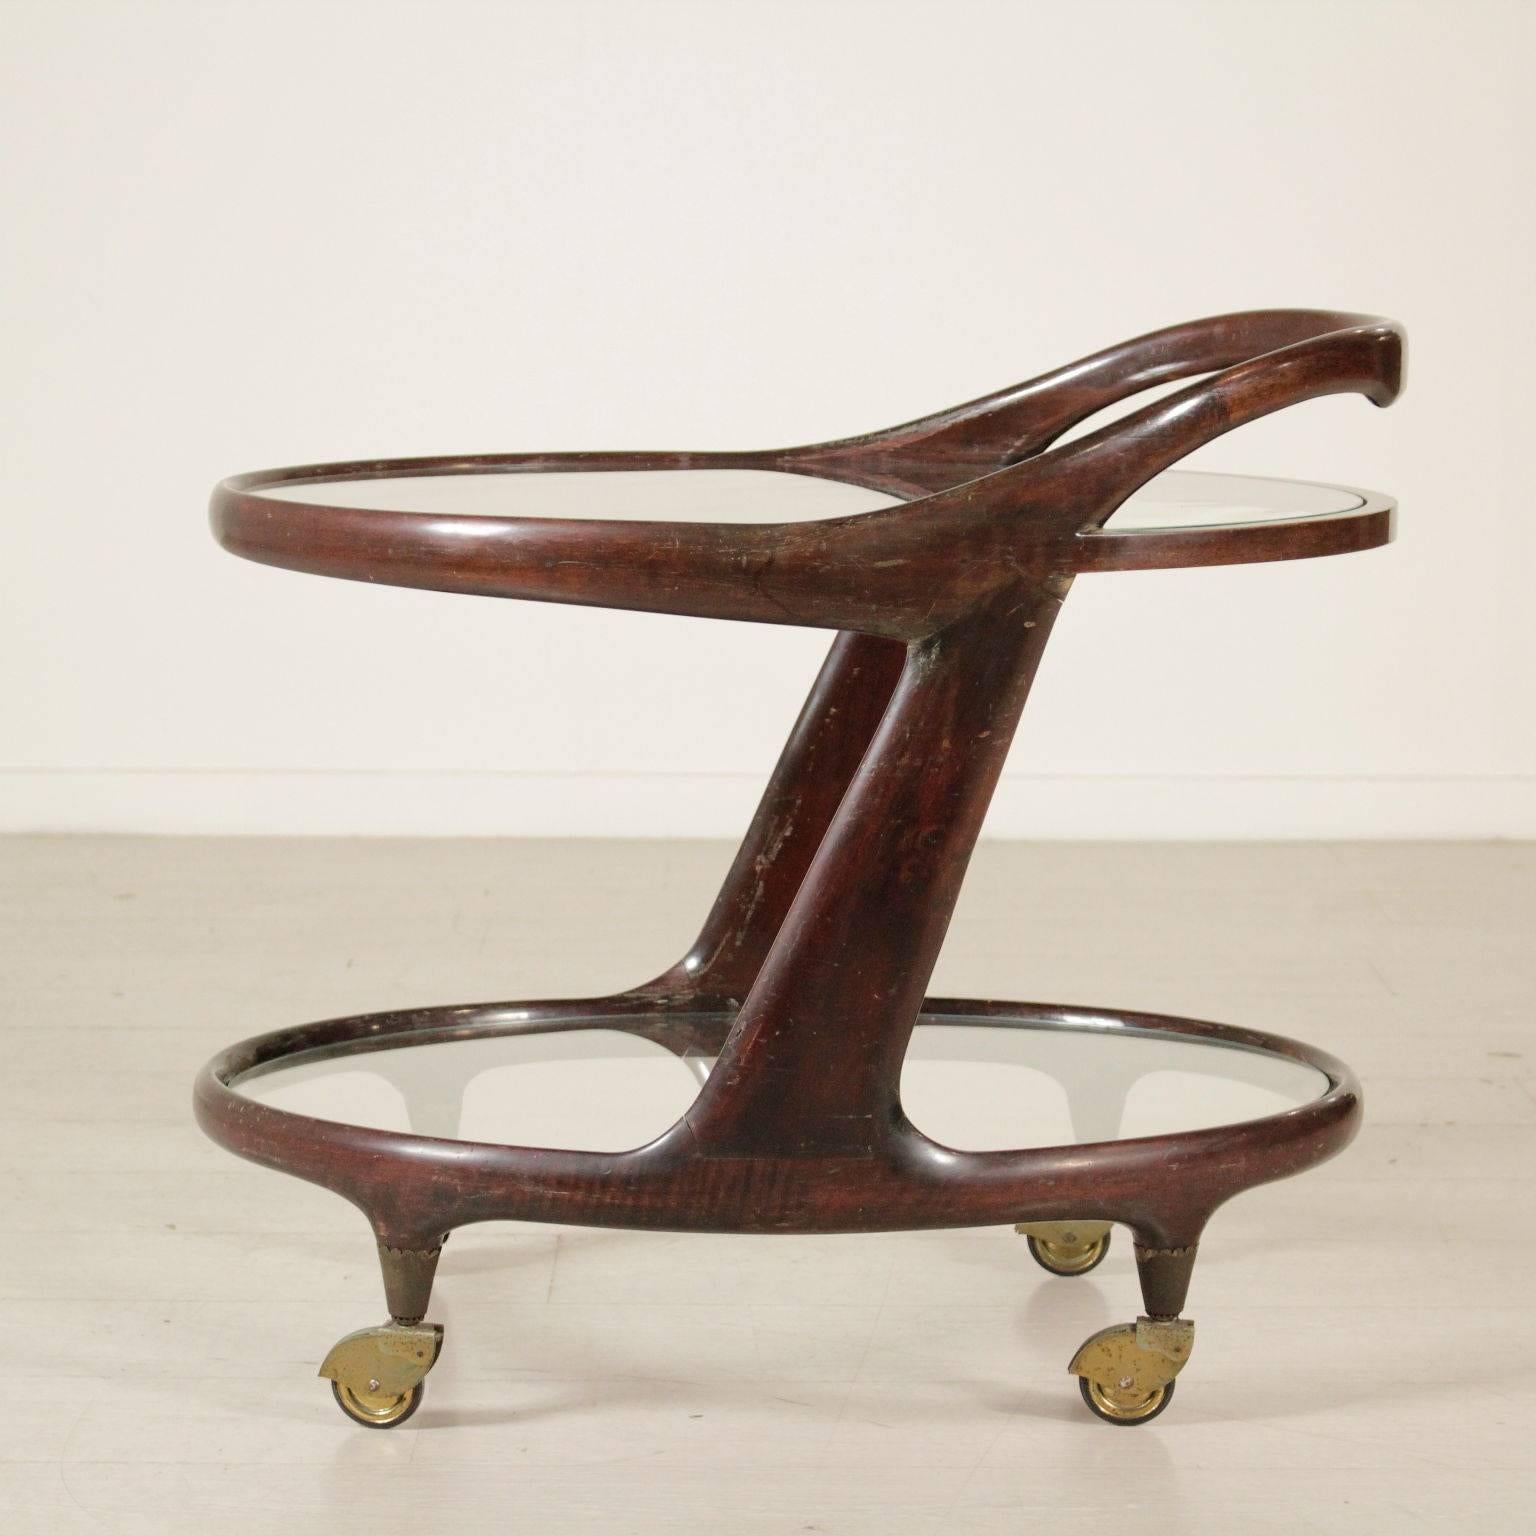 A service cart, mahogany and glass. Manufactured in Italy, 1950s.